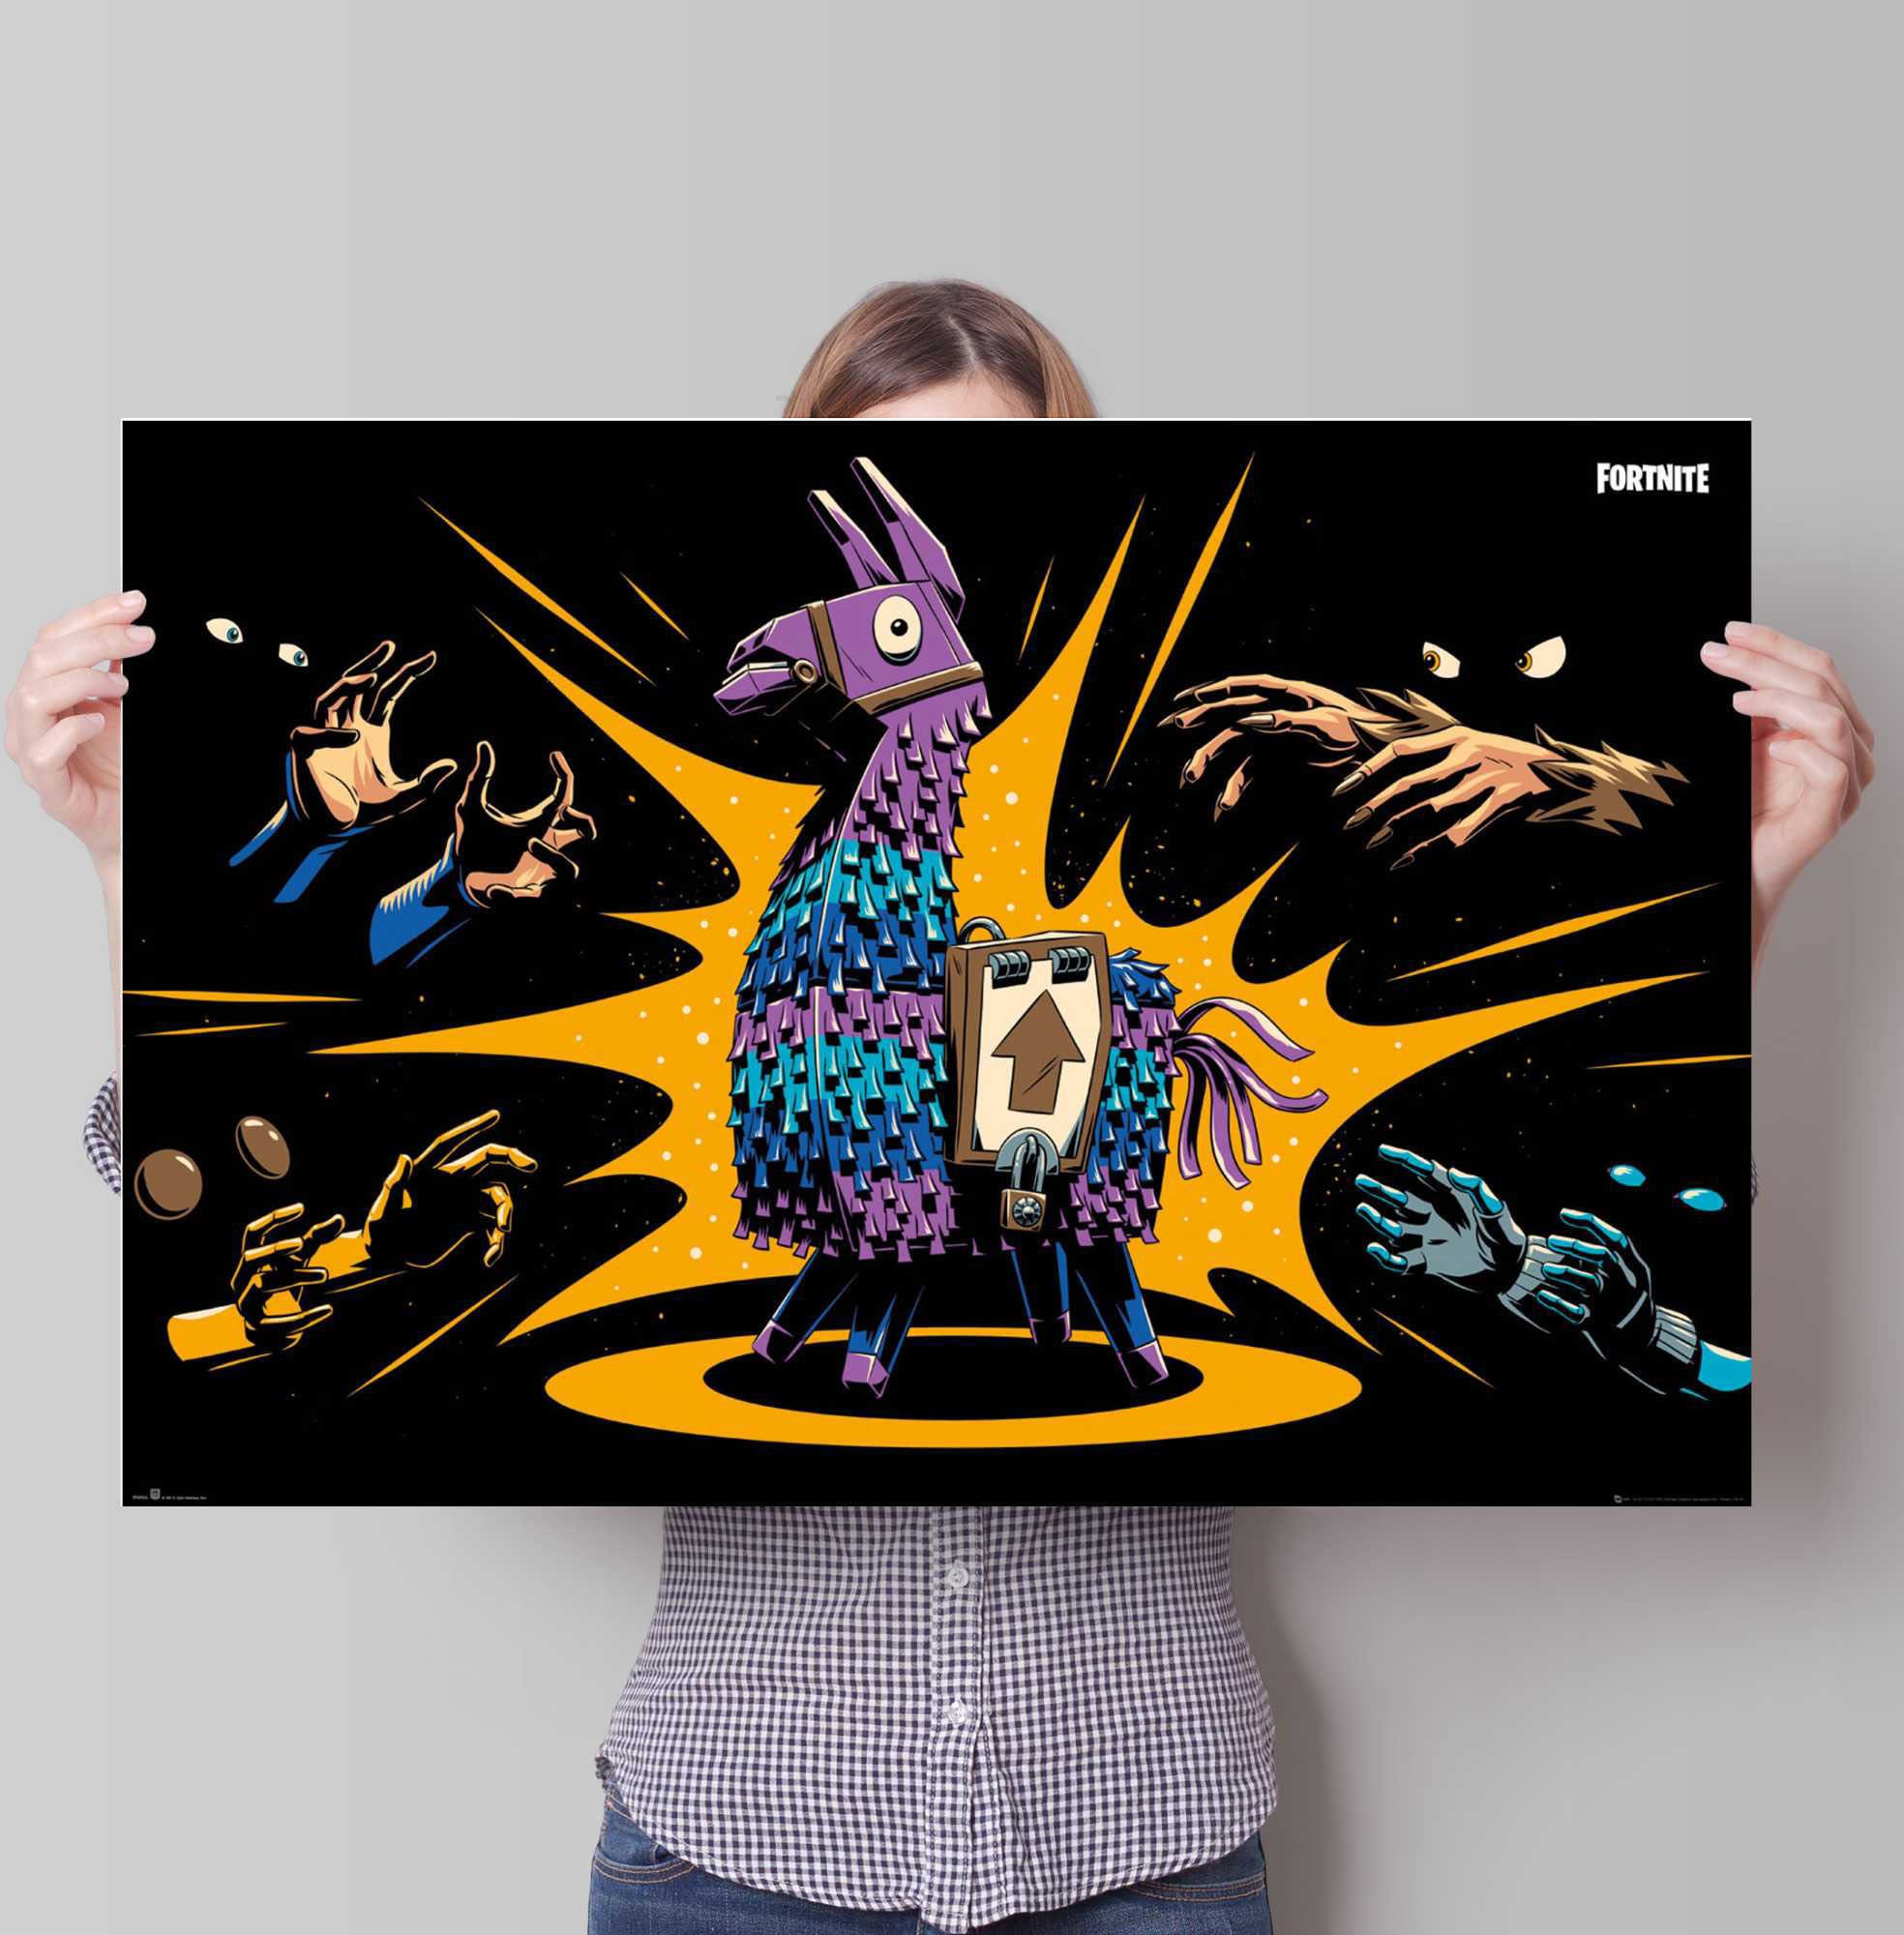 Game«, Loot online »Poster - St.) Fortnite OTTO Poster Llama Spiele, Reinders! (1 bei